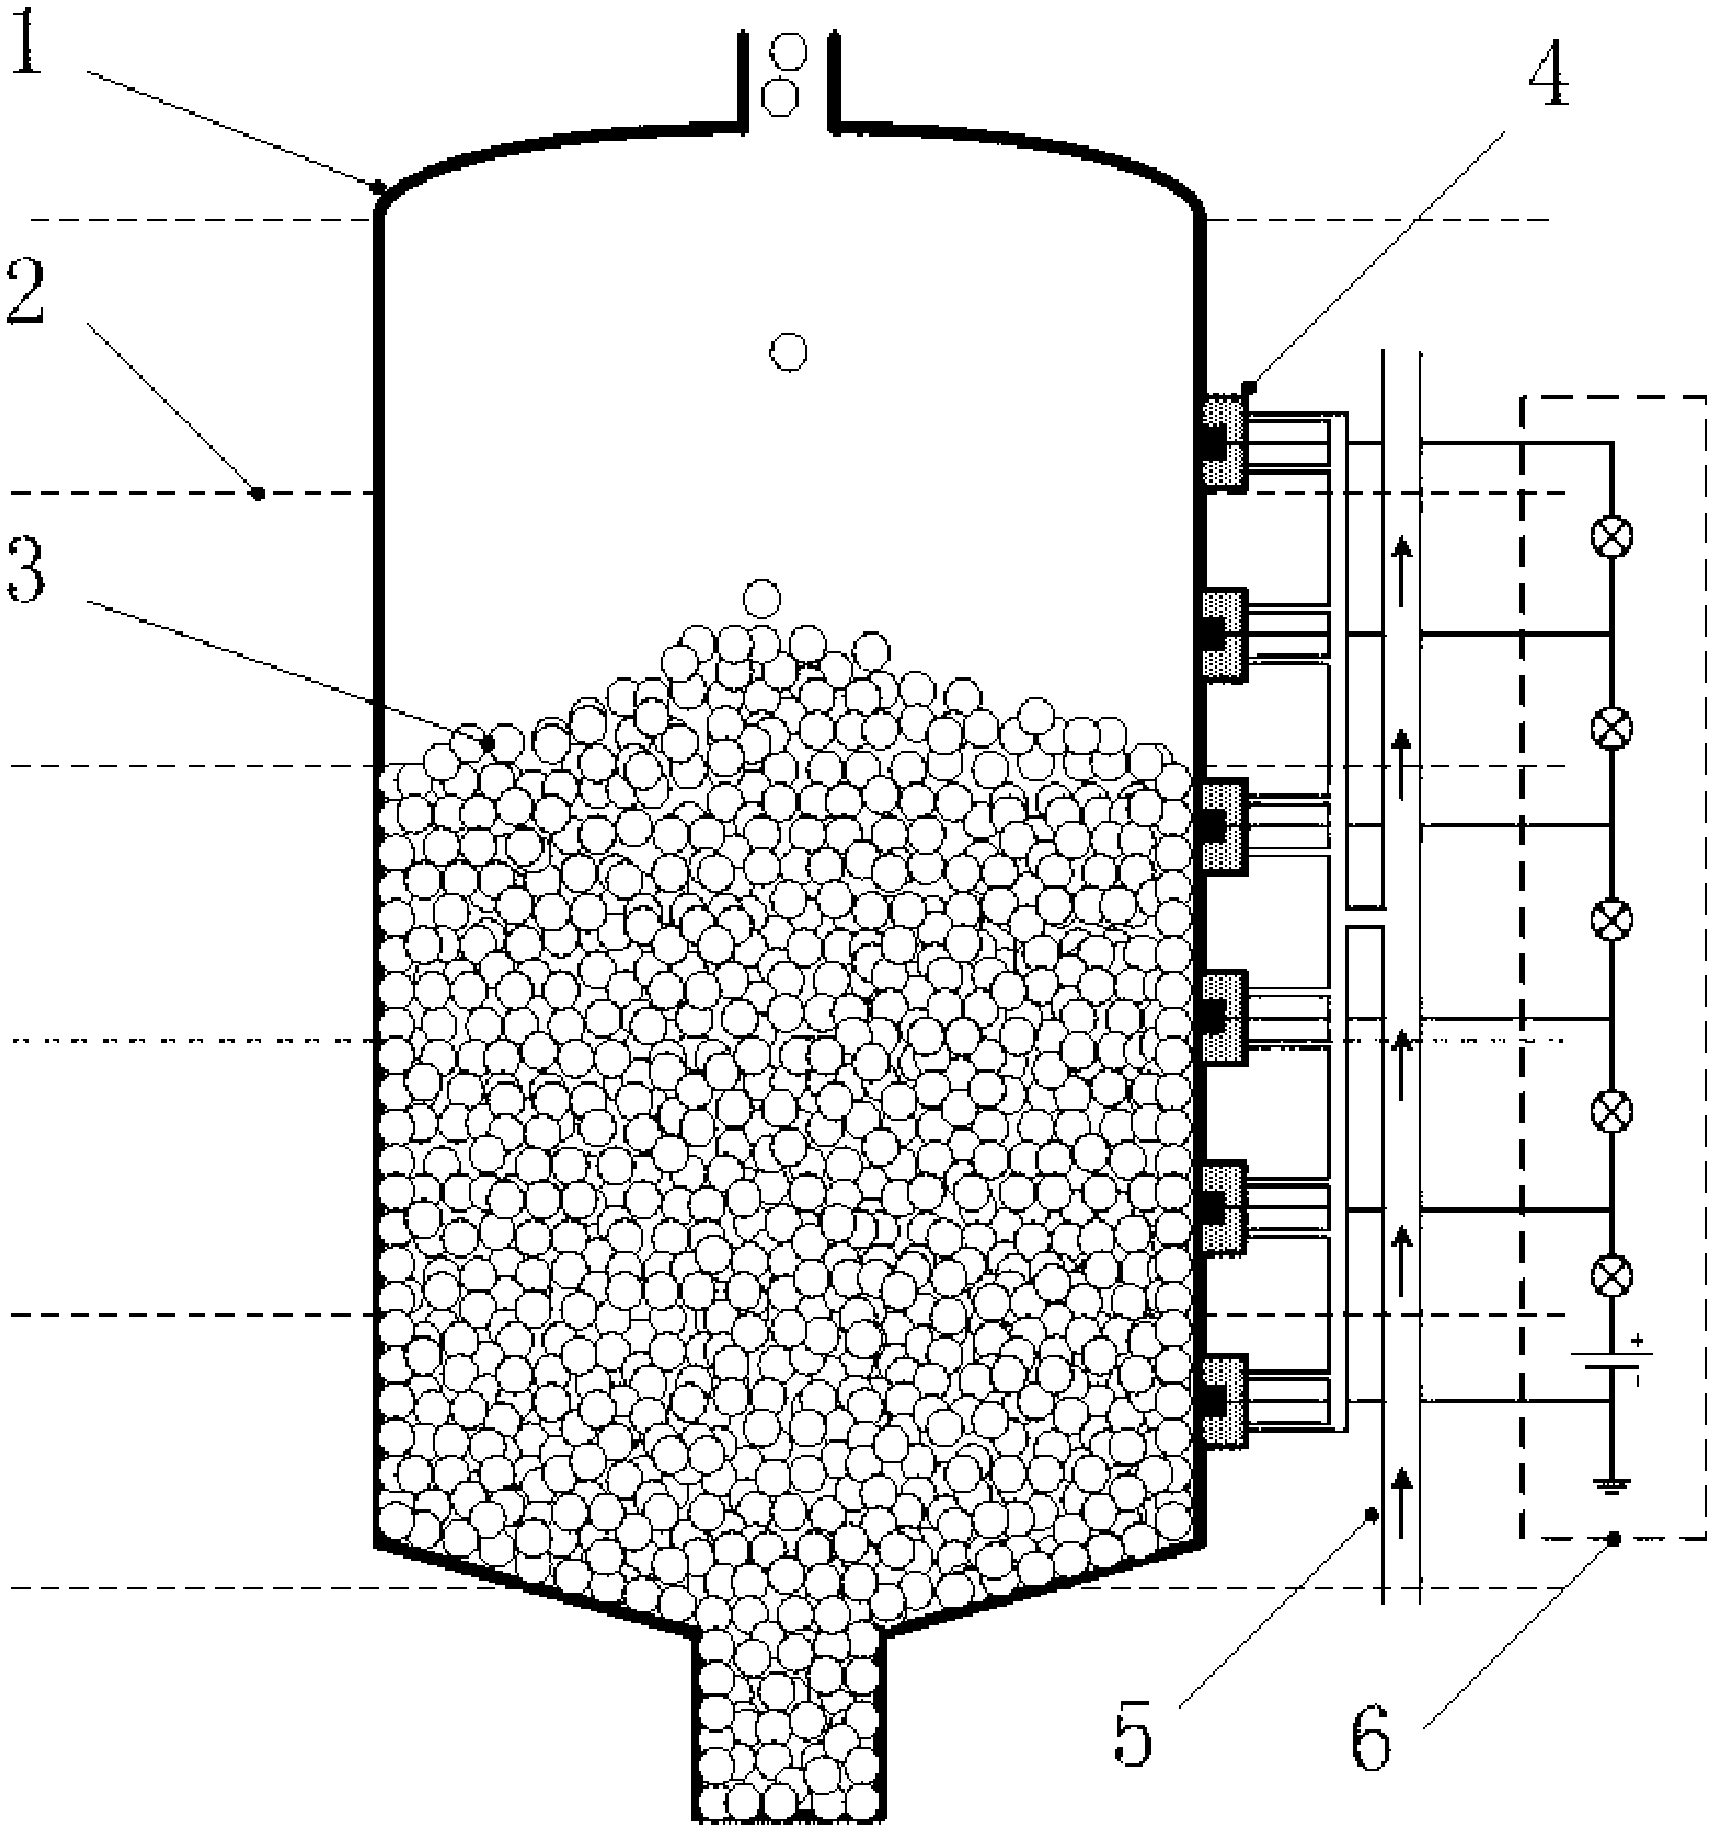 Reactor core fuel sphere position measurement device of pebble-bed-type high-temperature gas cooled reactor